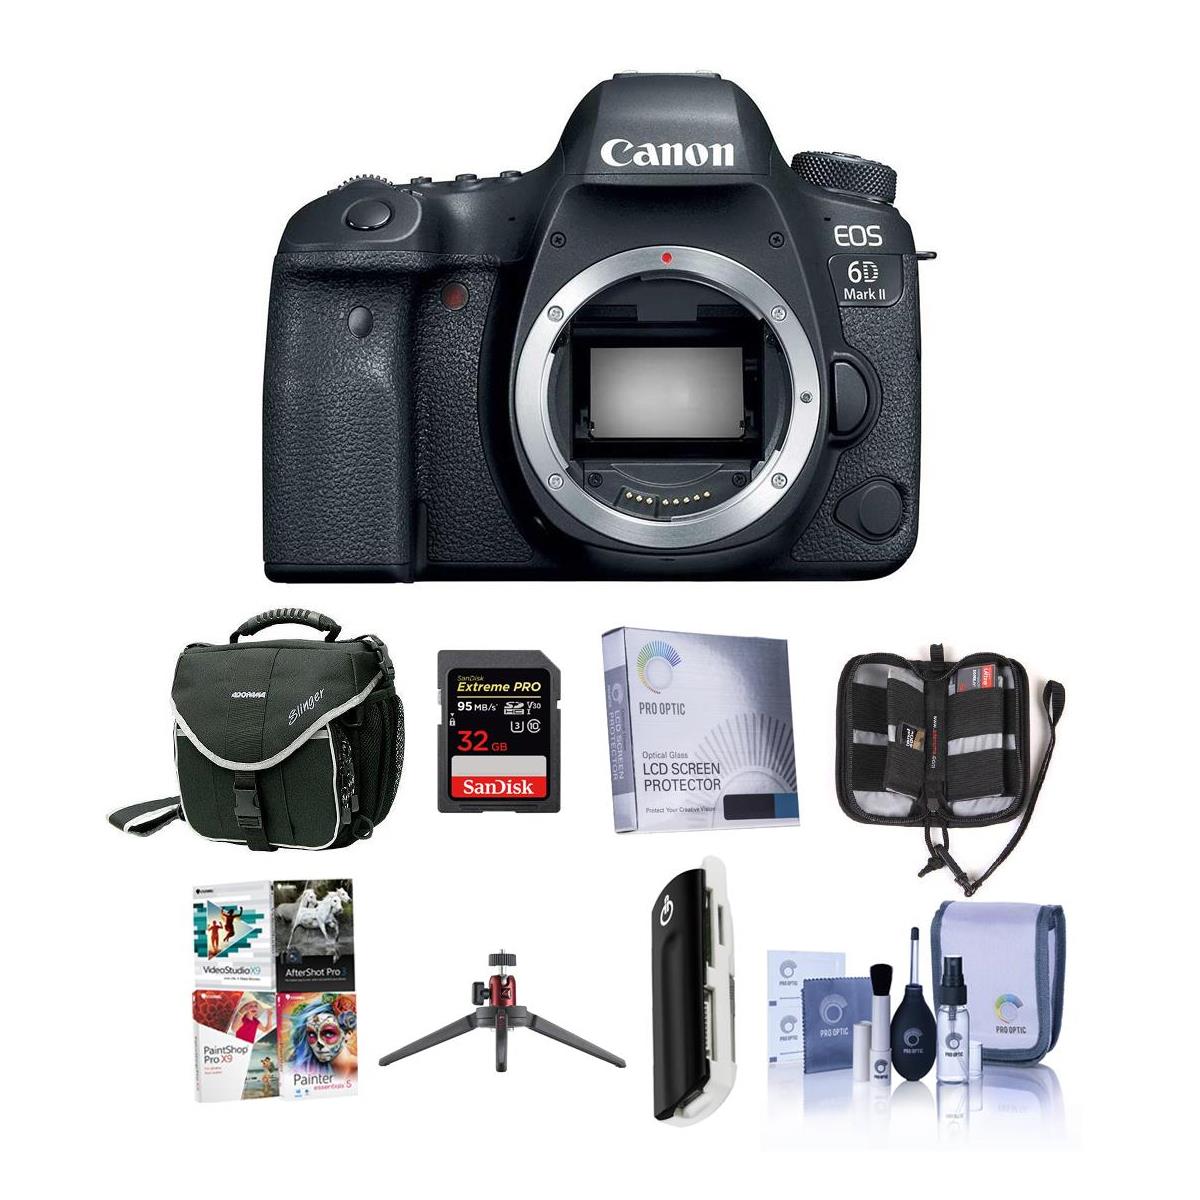 

Canon EOS 6D Mark II DSLR Body With Free Accessory Bundle